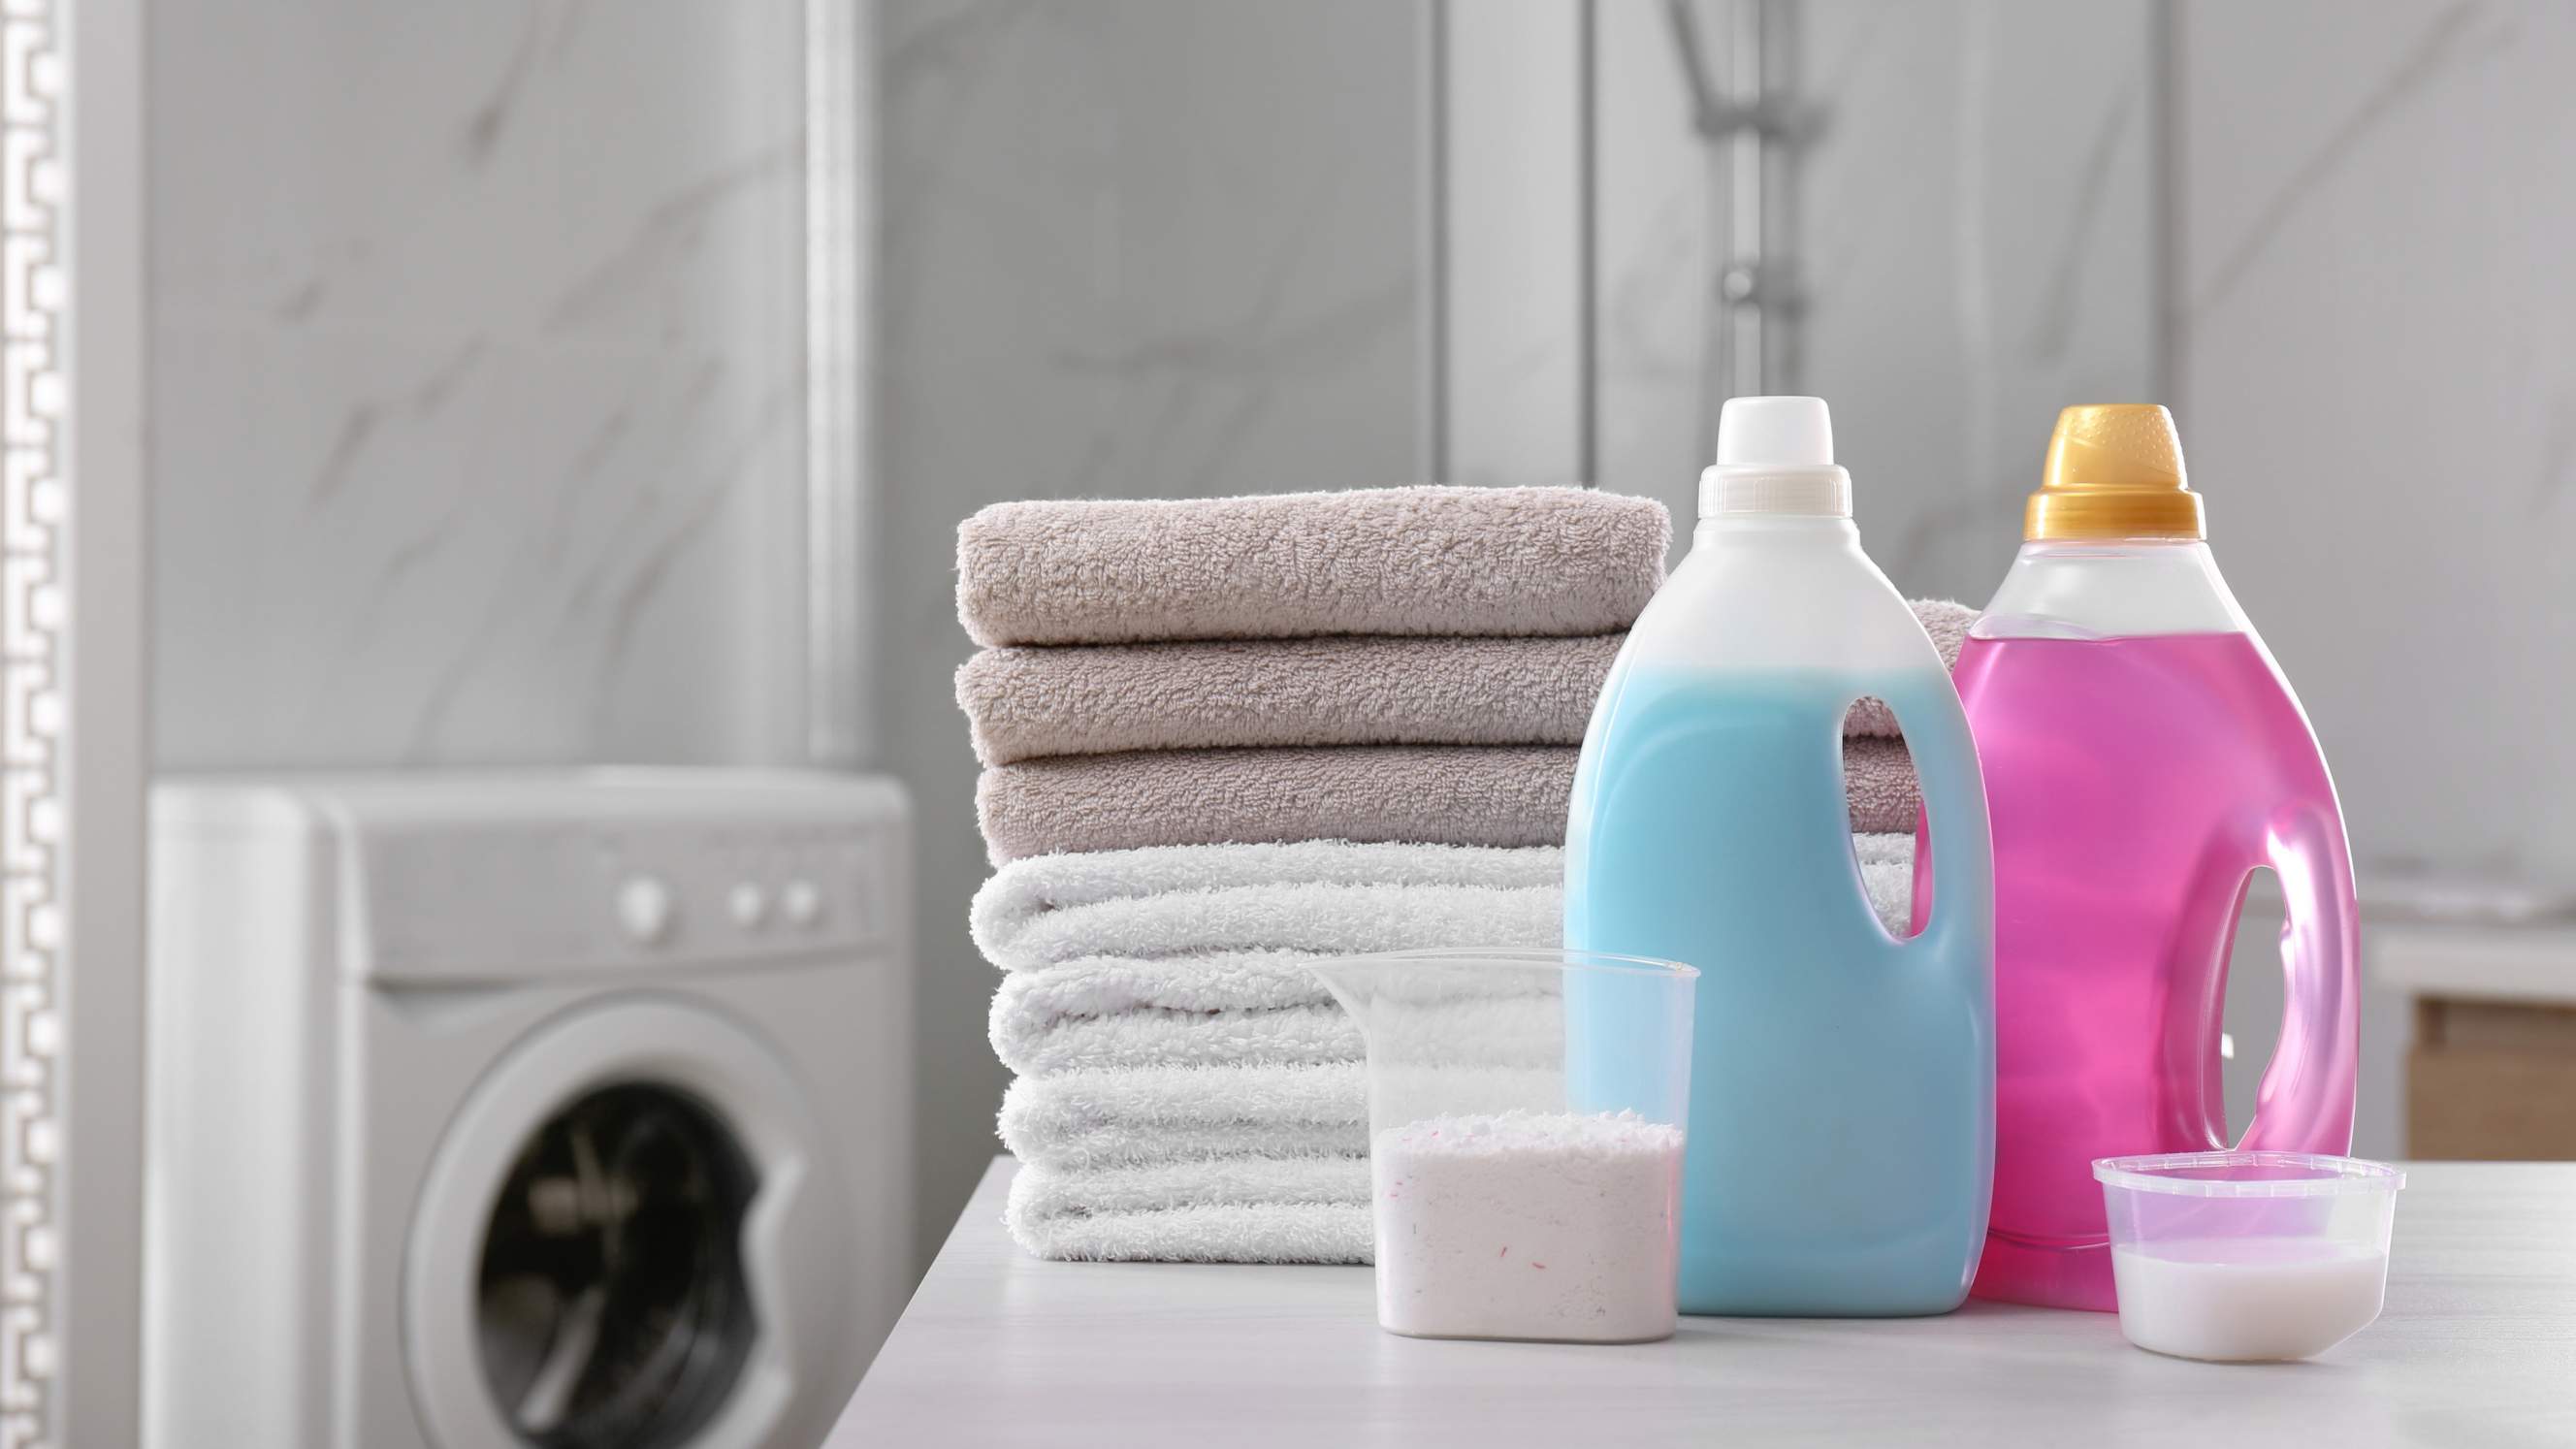 Fabric softener vs detergent - Detergent and fabric softener with stack of folded towels on white table in bathroom